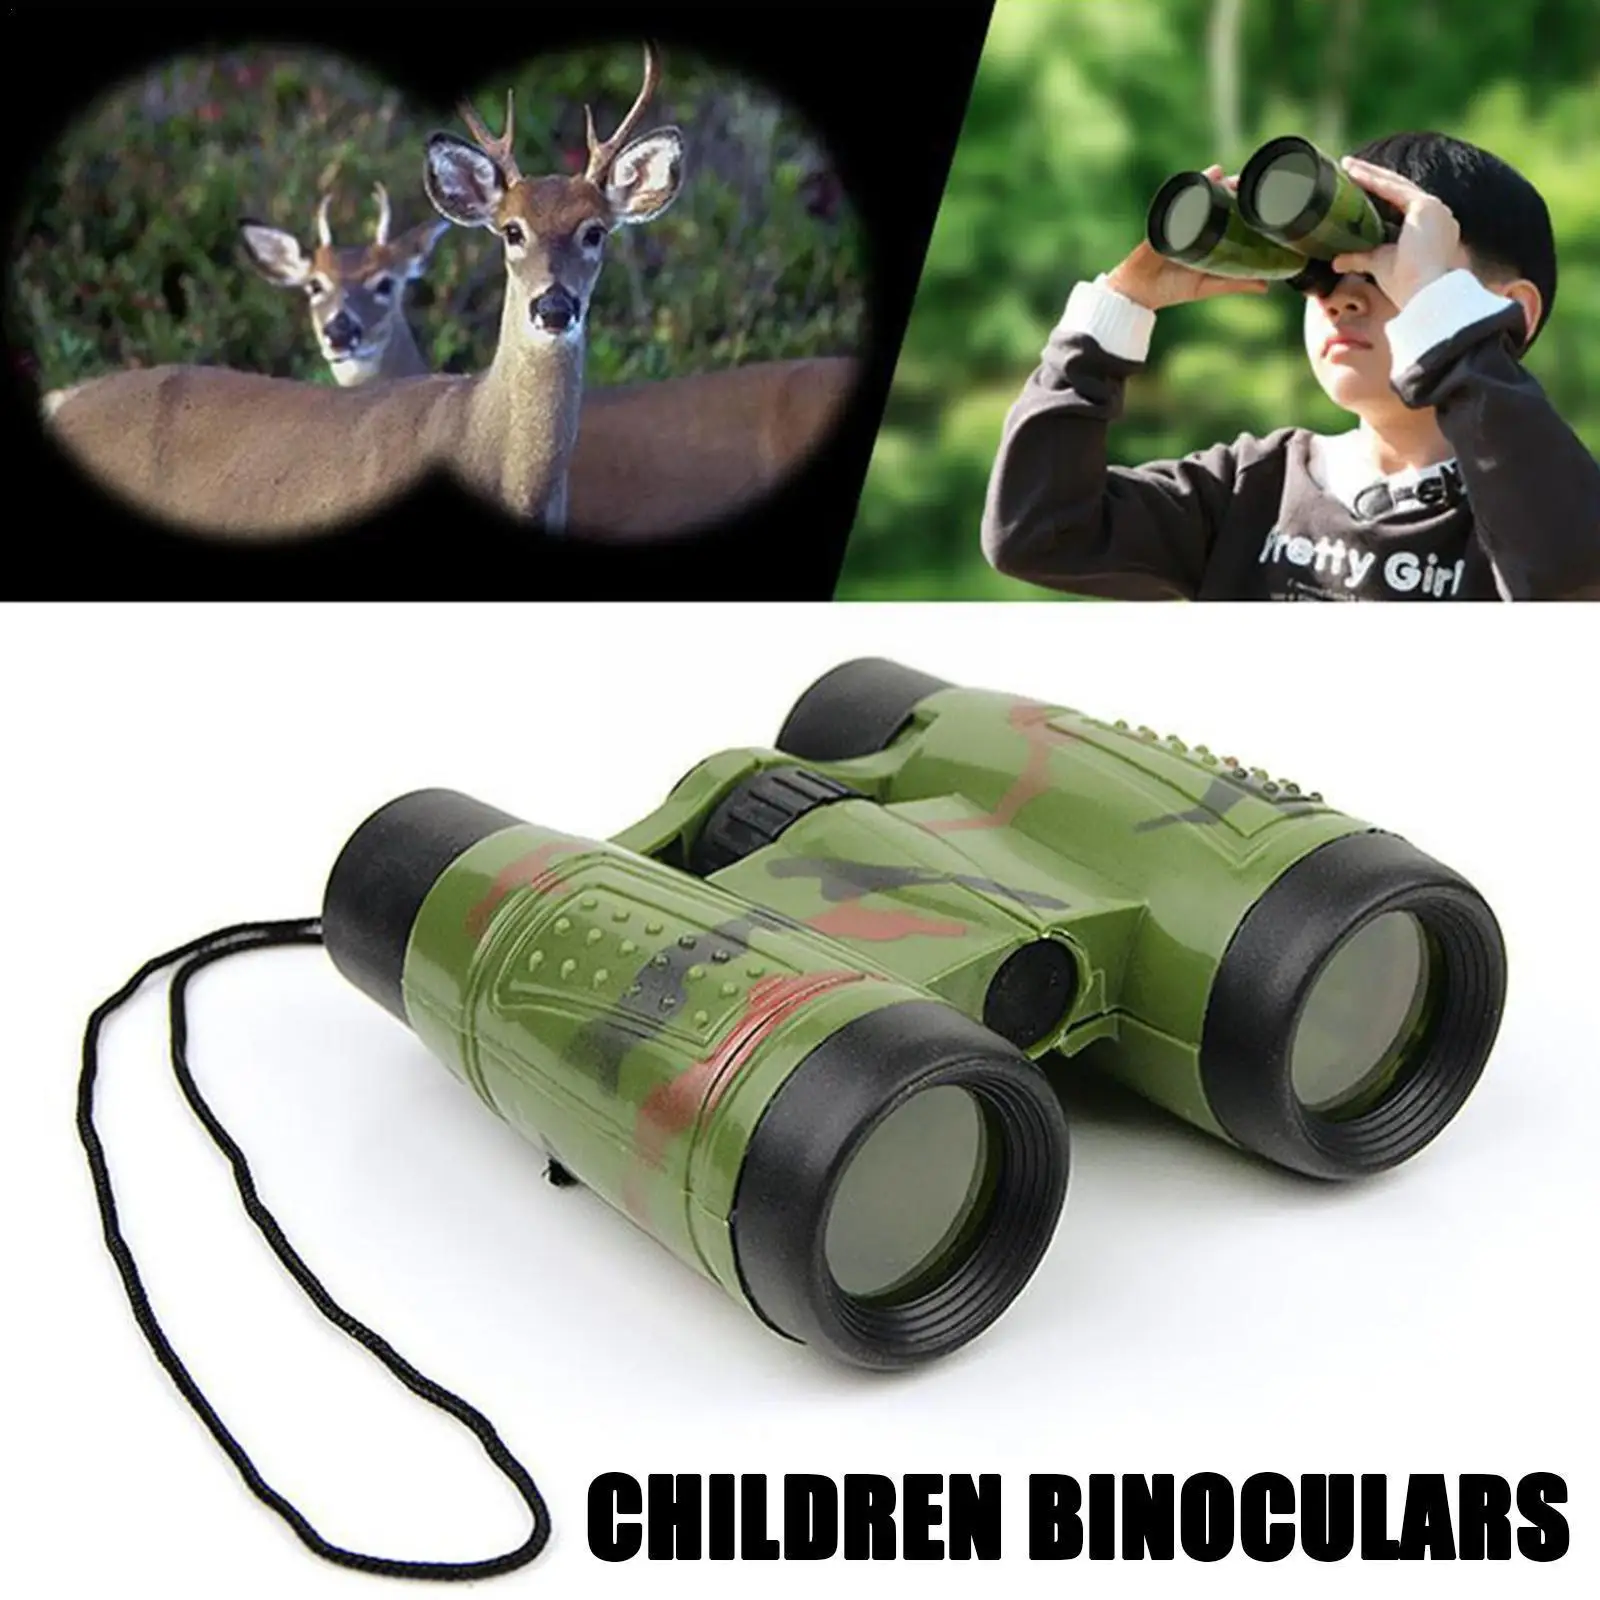 

Binoculars Telescope Toy Mountaineering And Natural Survival Telescope Field Scenery Cs Children Simulation Hunting Toy Y0v1